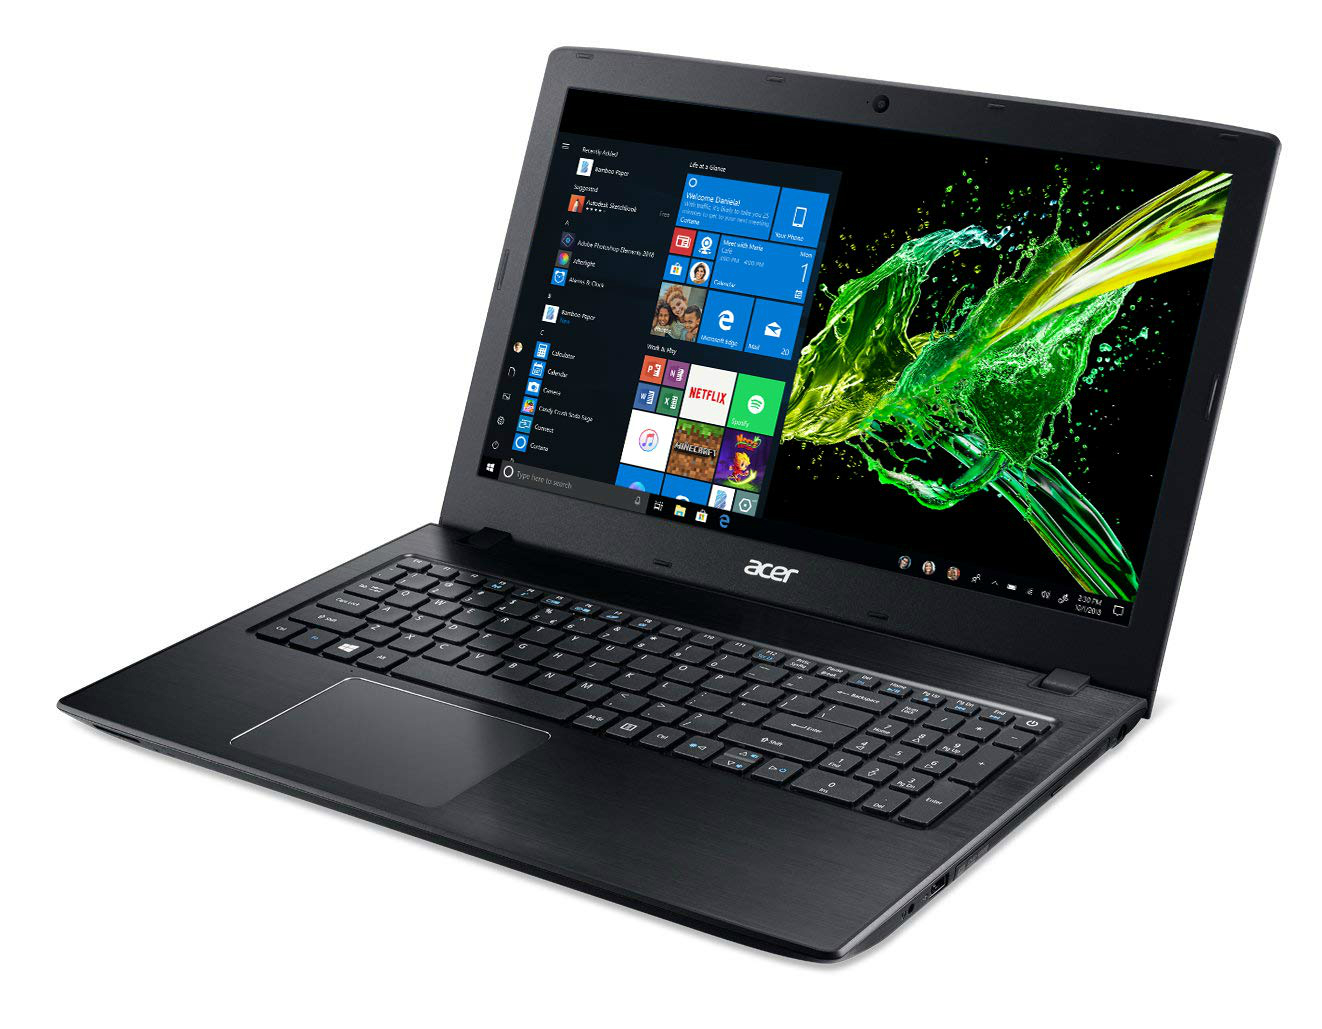 amazon slashes prices on acer laptops desktops monitors and gaming gear aspire e 15 laptop